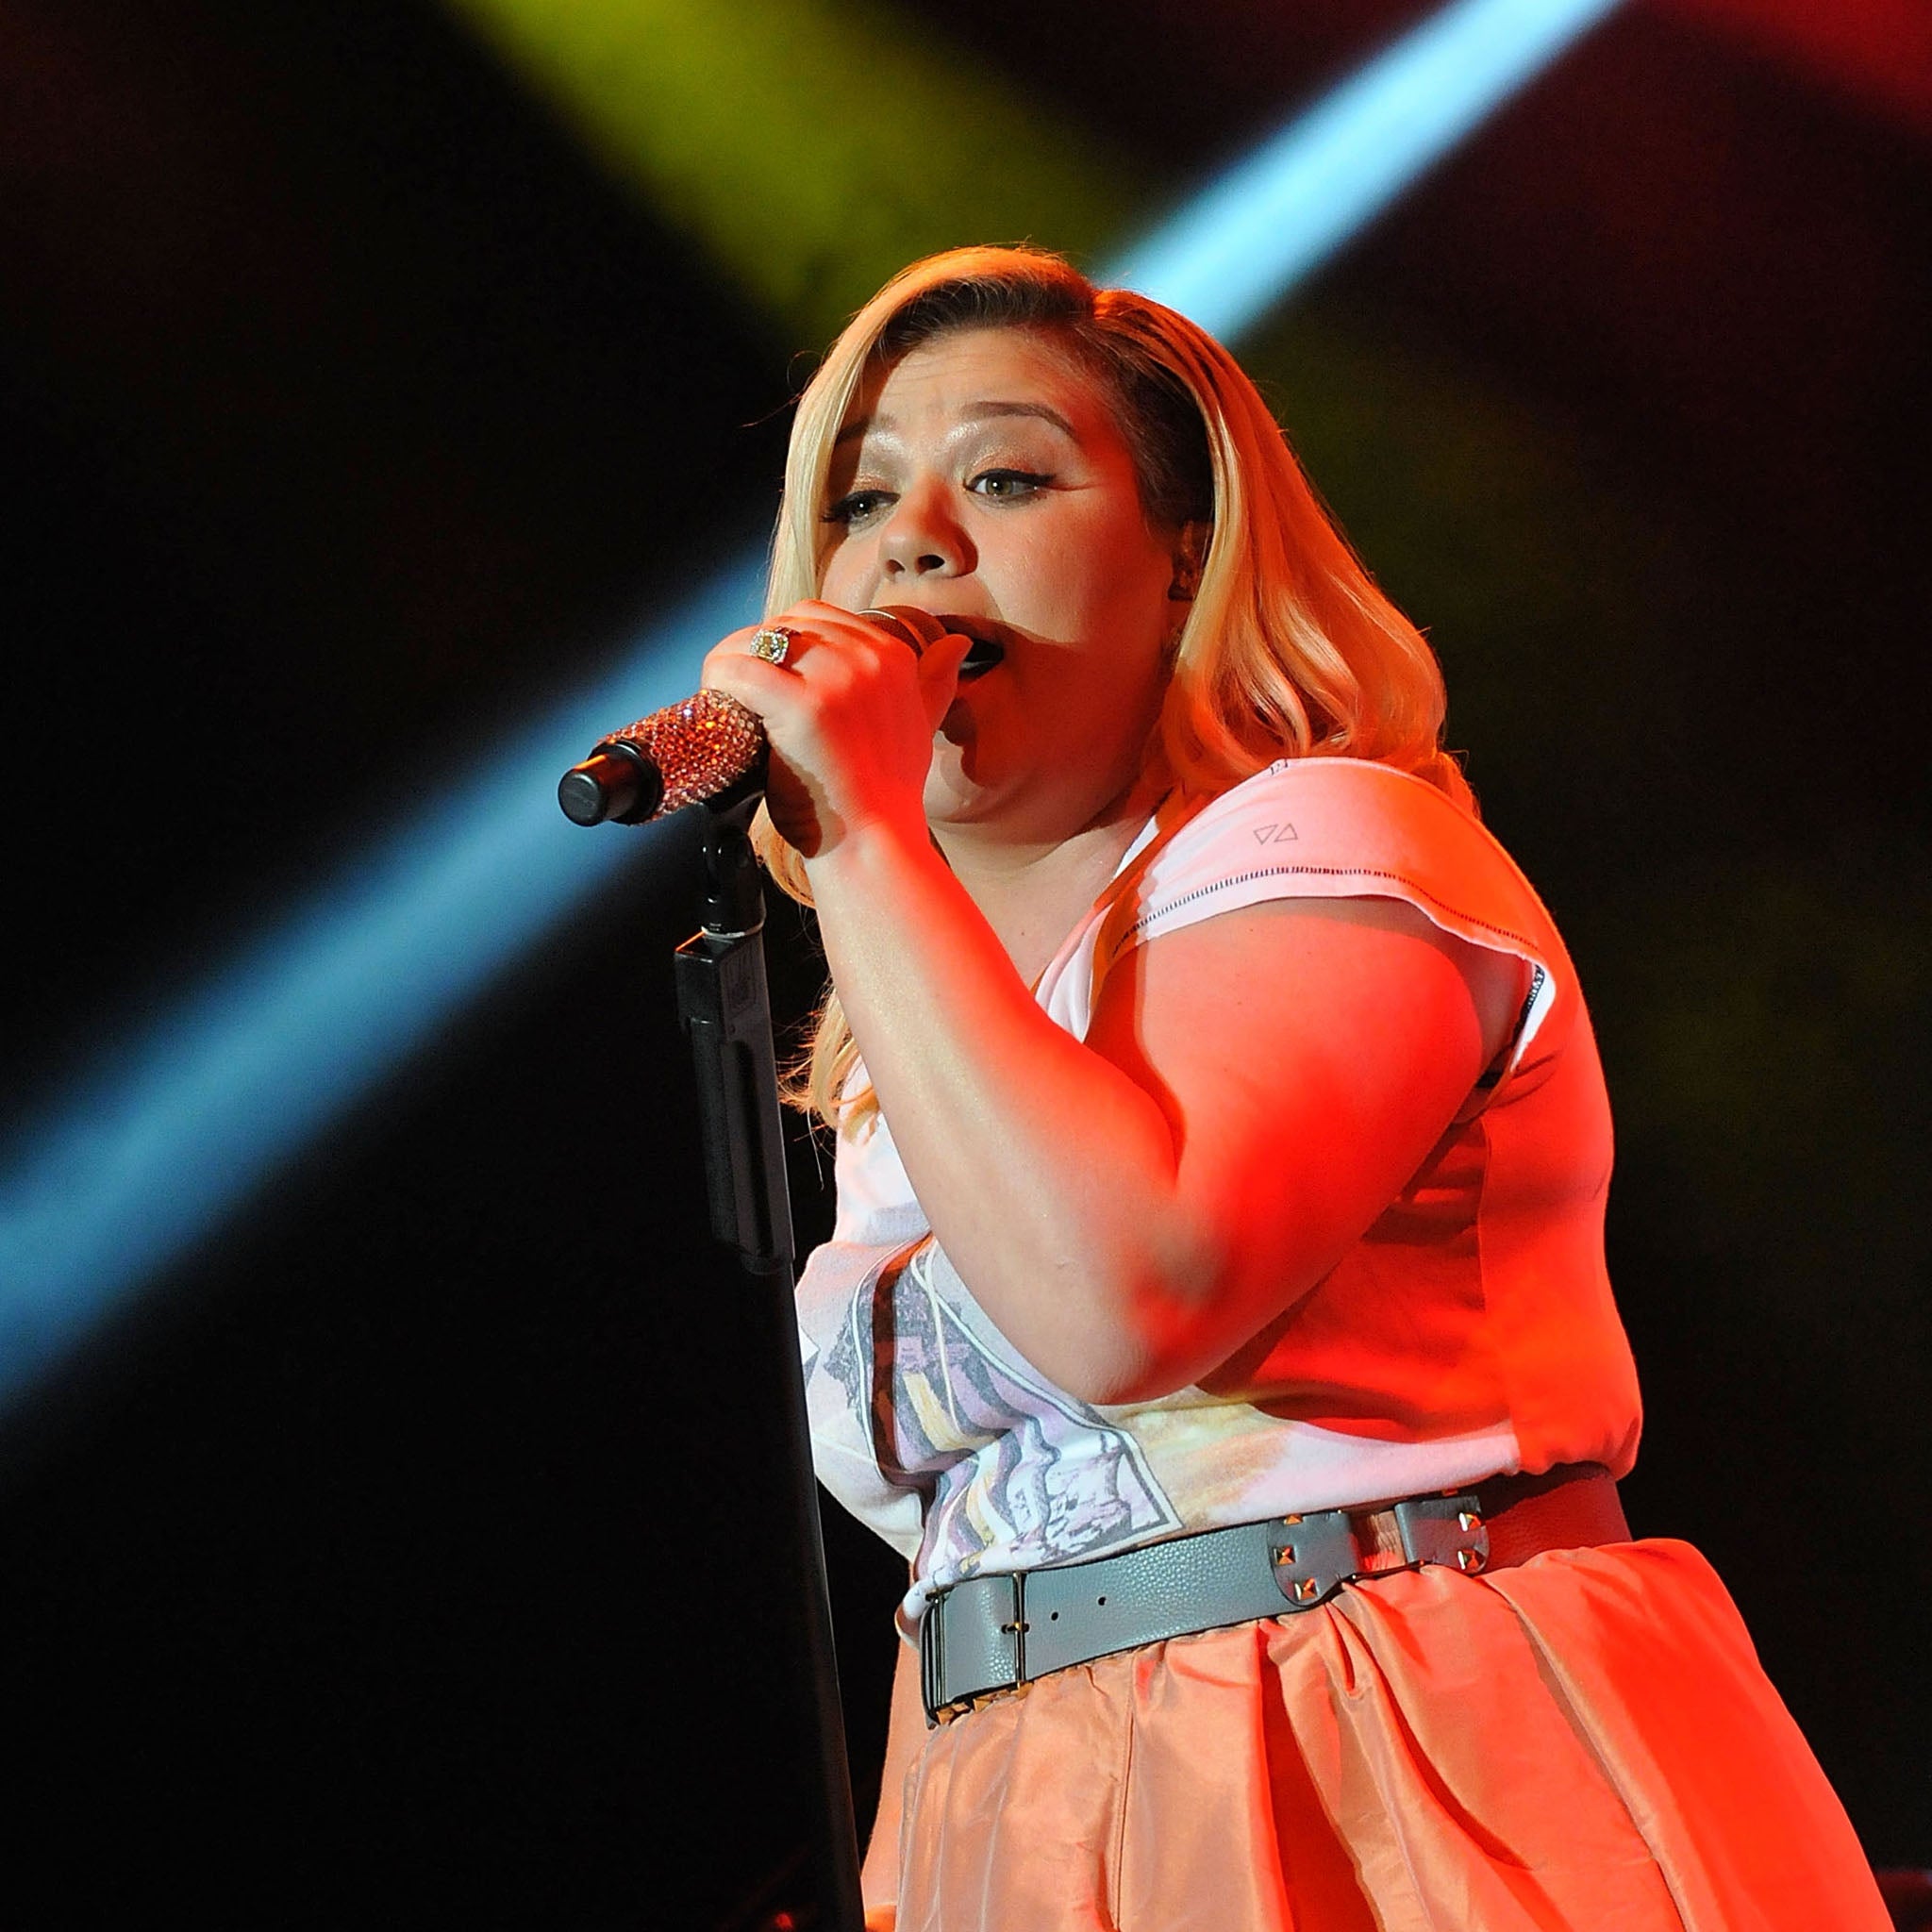 A real belter: Kelly Clarkson